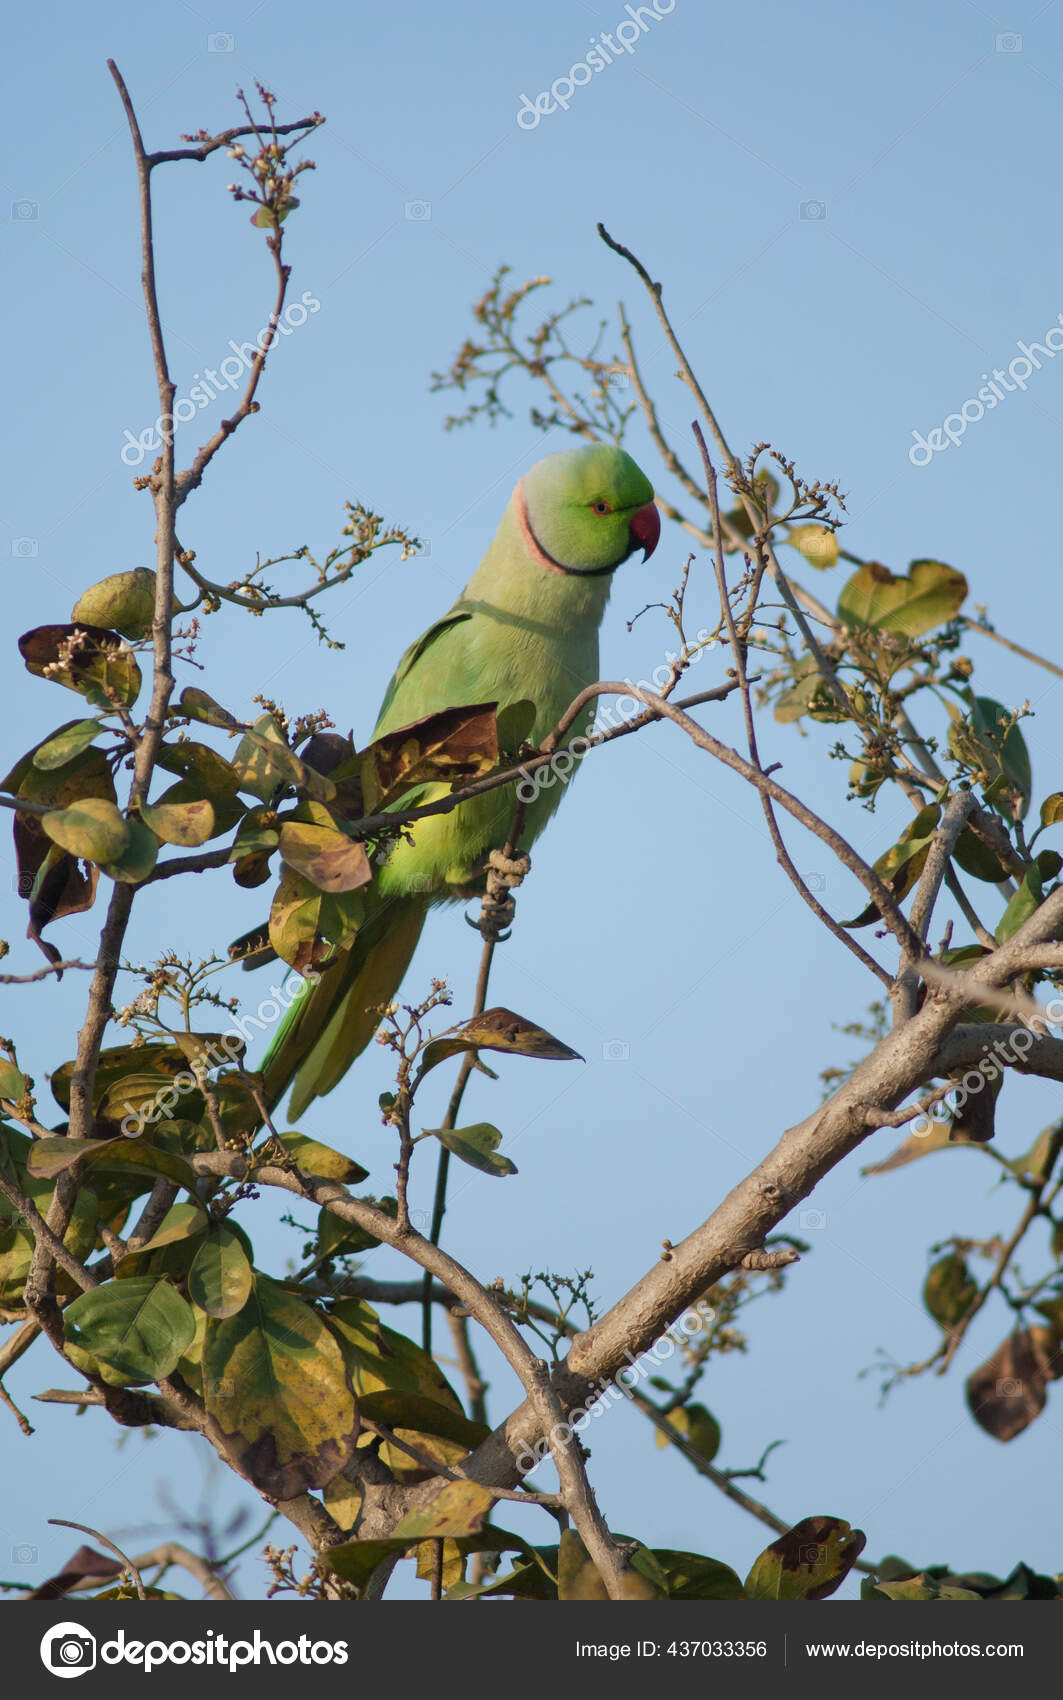 20 Type Of Green Parrots With Red Beaks In The World -